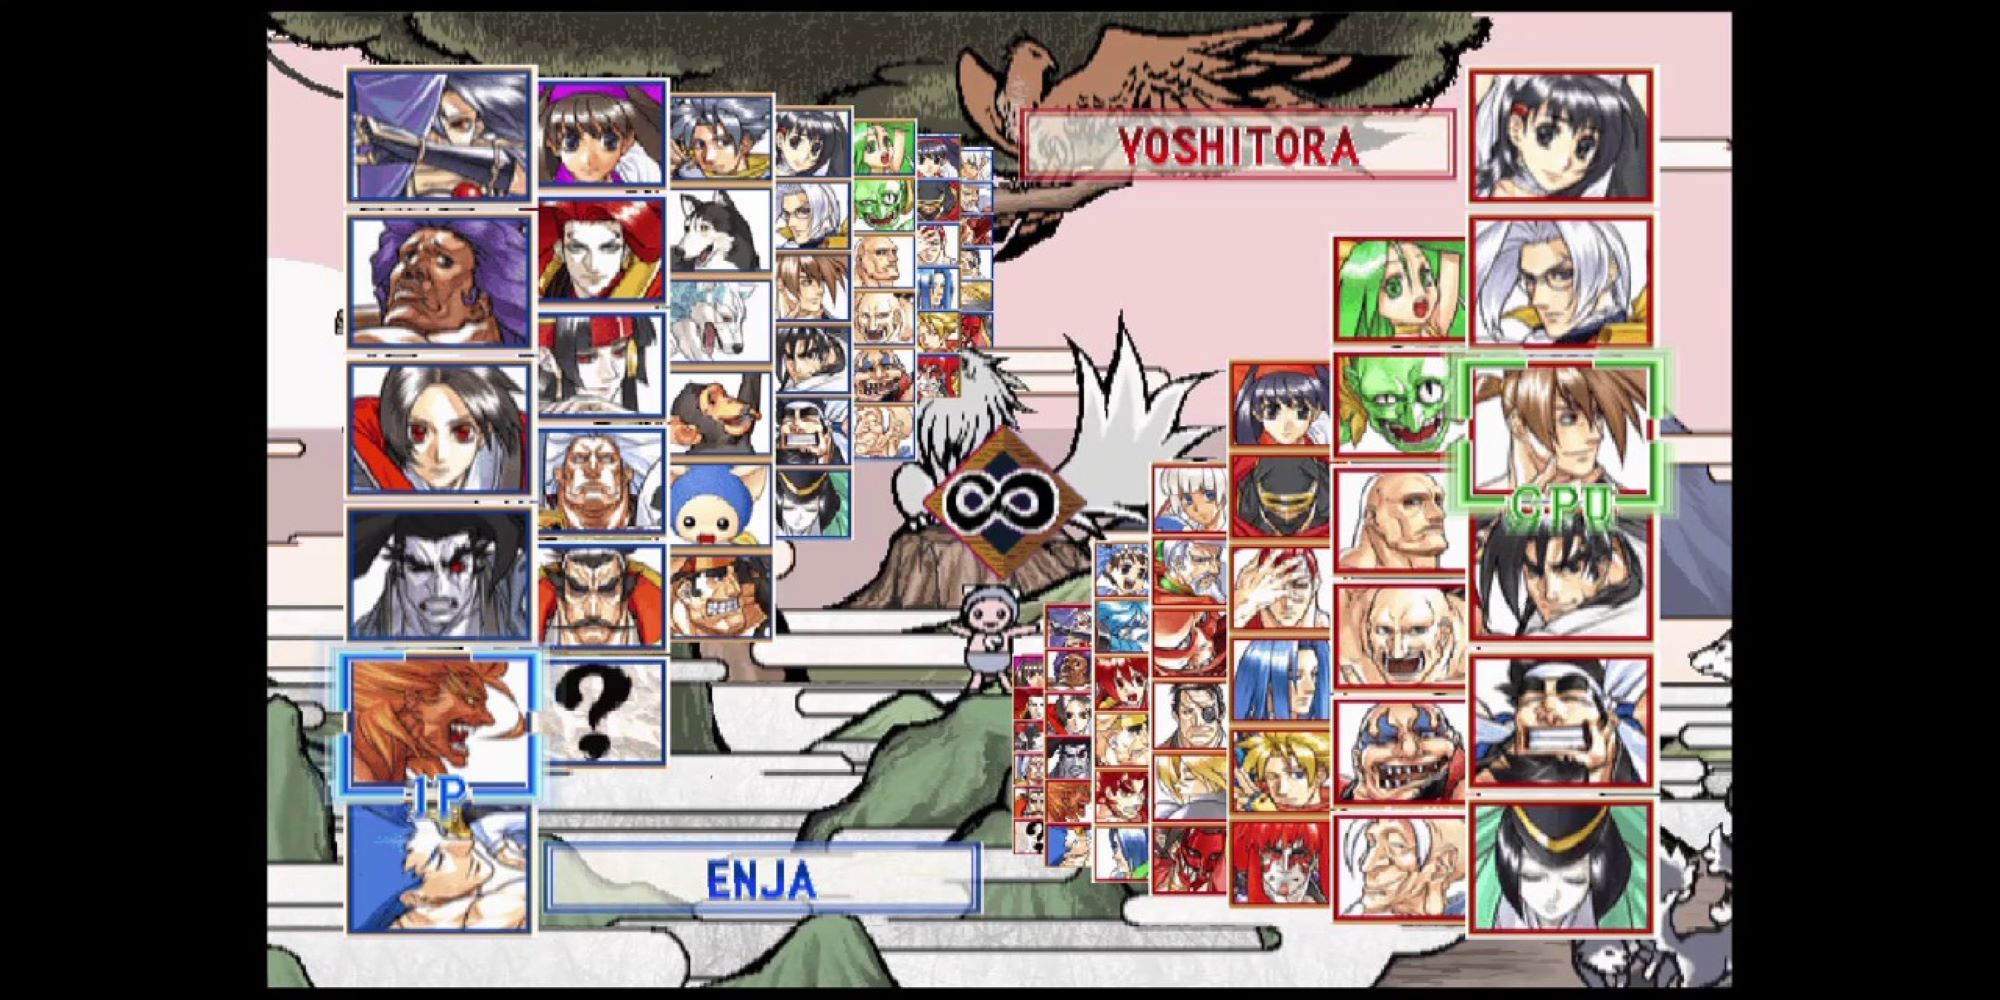 The player 1 icon hovers over Enja and the player 2 icon hovers over Yoshitora on Samurai Shodown 6's character select screen.